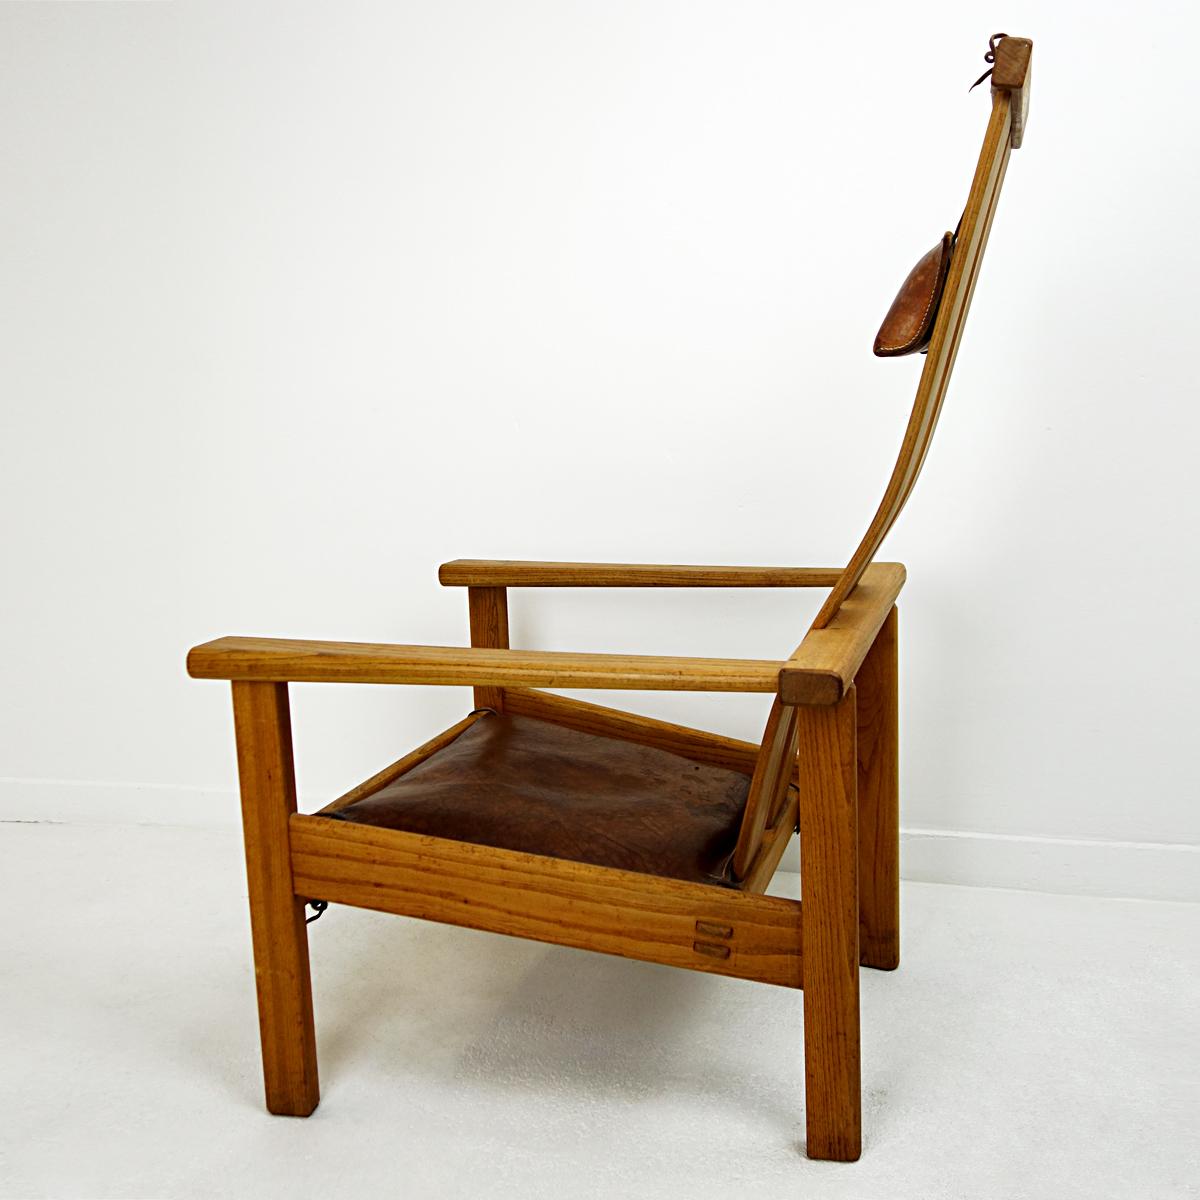 This lounge chair is truly one of a kind. Dutch designer Stefan during only produces his designs once. The beautifully organically bent back and seating sit in a sturdy frame. The head and seat cushions are made of harness leather.
Stefan During